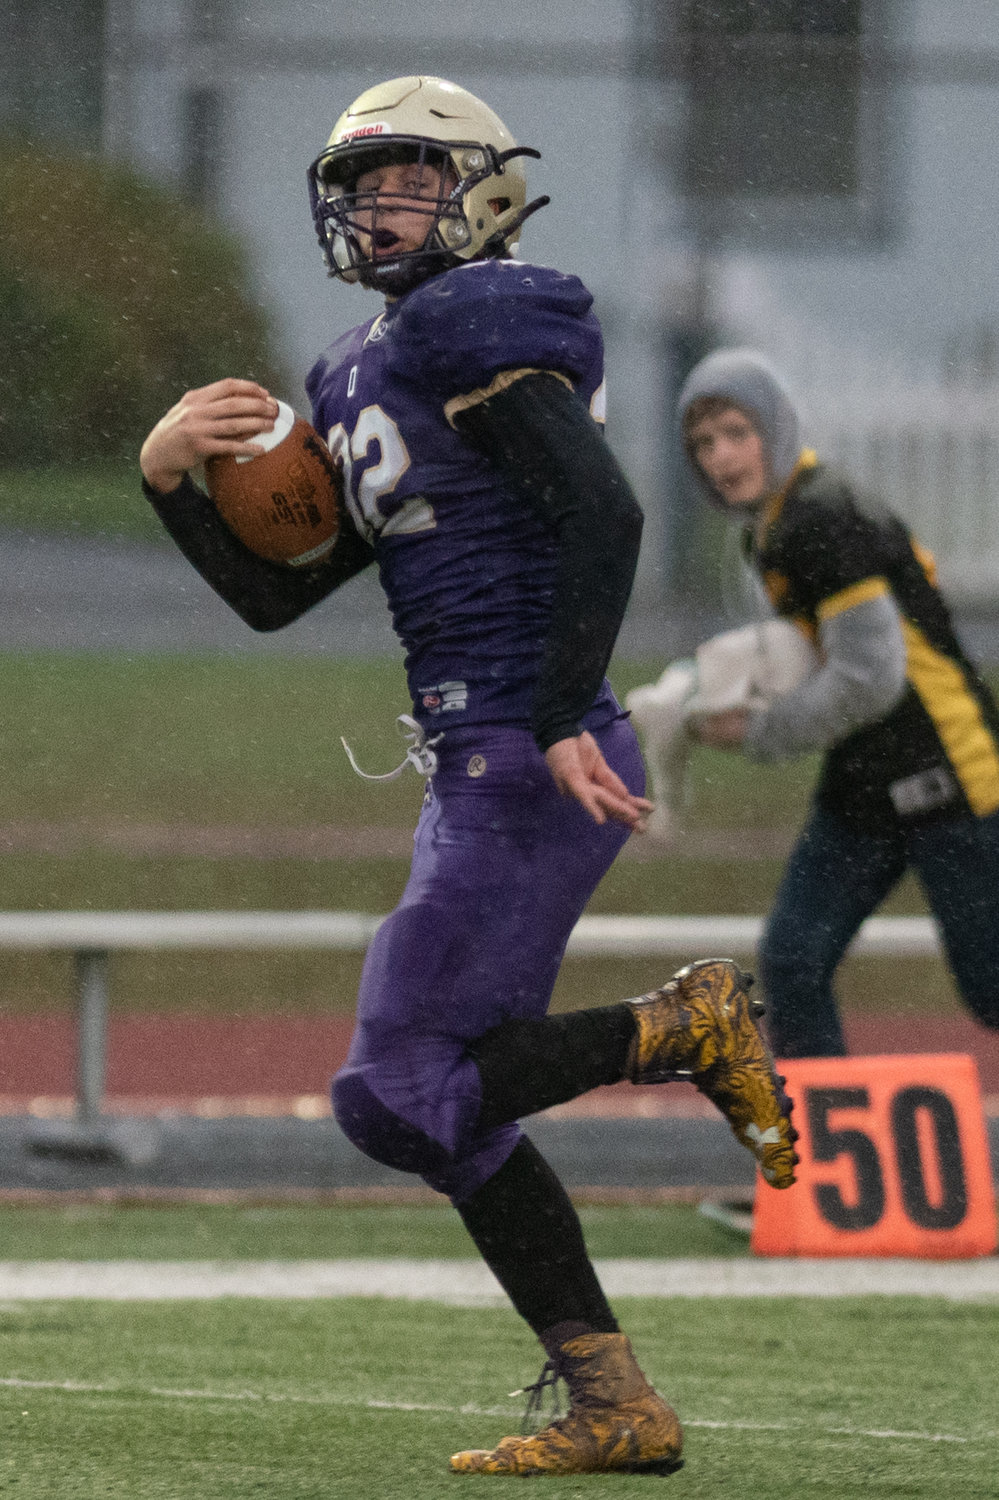 Onalaska fullback Marshall Haight looks back as he races toward the end zone against River View in the opening round of the 2B state tournament at Centralia Tigers Stadium Nov. 13.